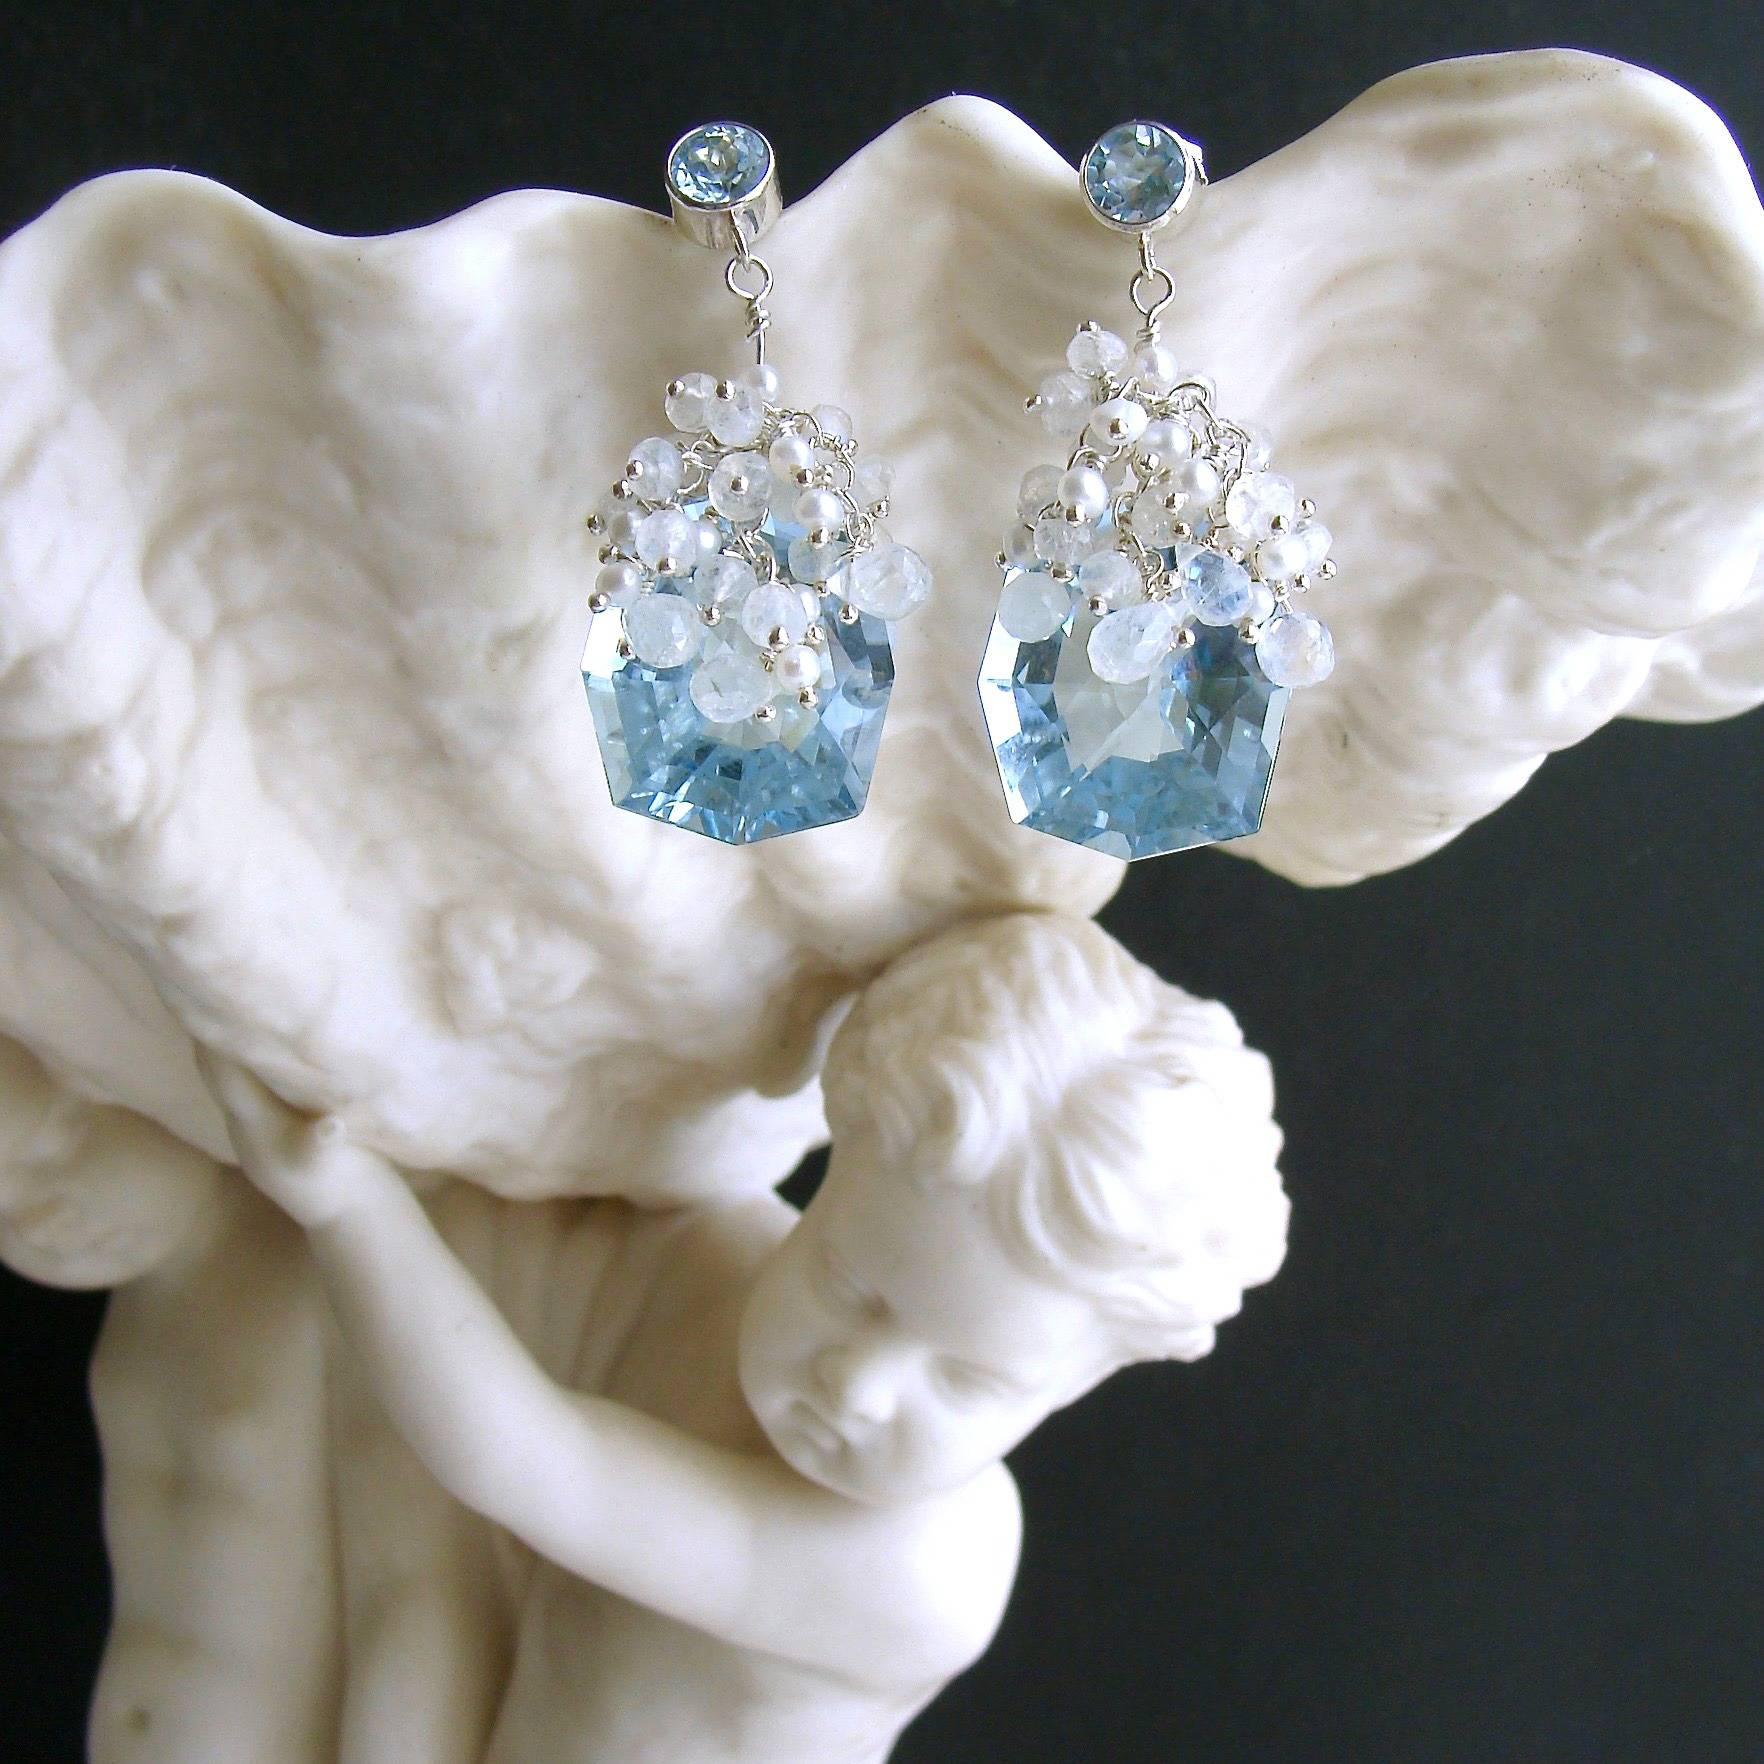 Sparkling fancy-cut blue topaz have been adorned with cascading tendrils of hand-linked minuscule seed pearls and flashy moonstone rondelles and briolettes, while suspended from simple blue topaz post earrings.  The delicate nature of these earrings